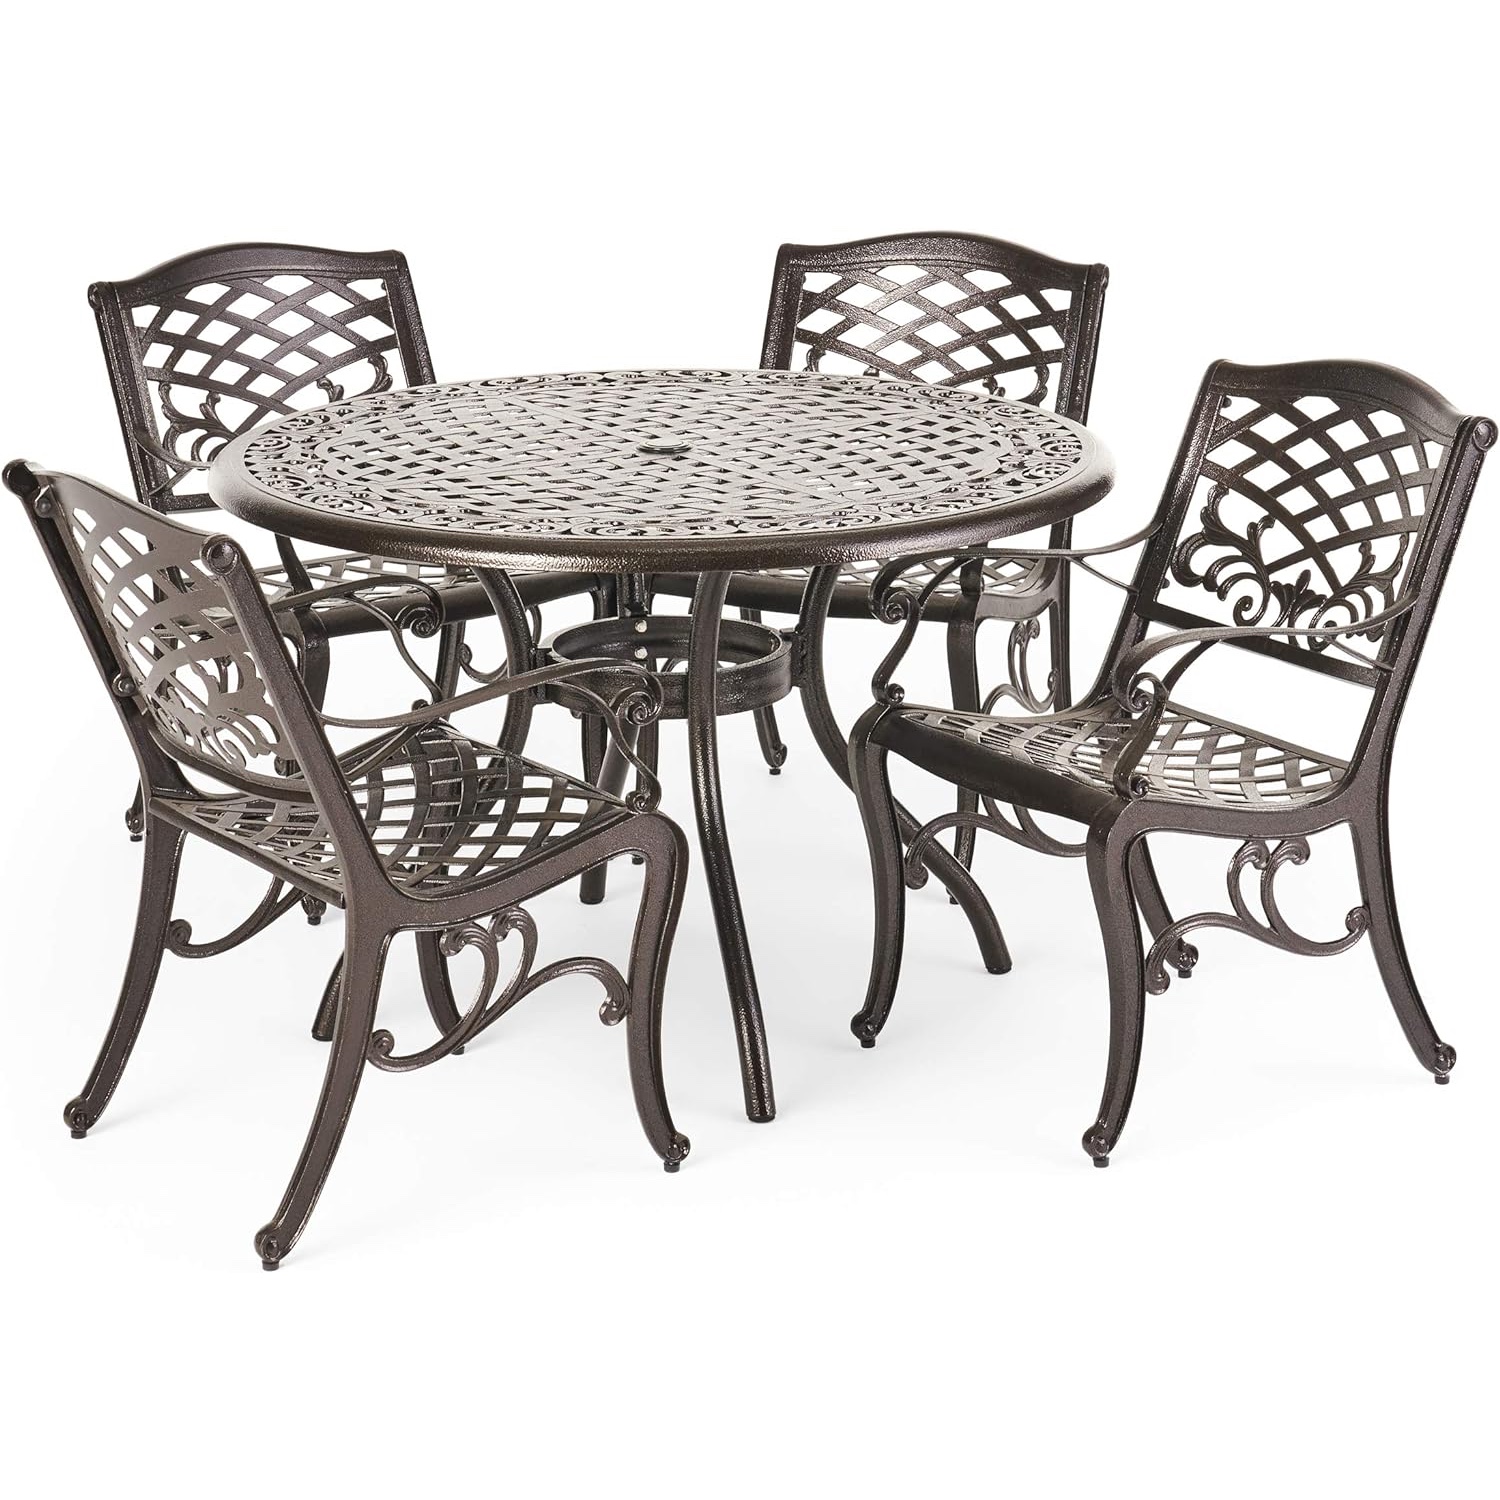 Christopher Knight Home Hallandale in Hammered Bronze dining table with 4 chairs